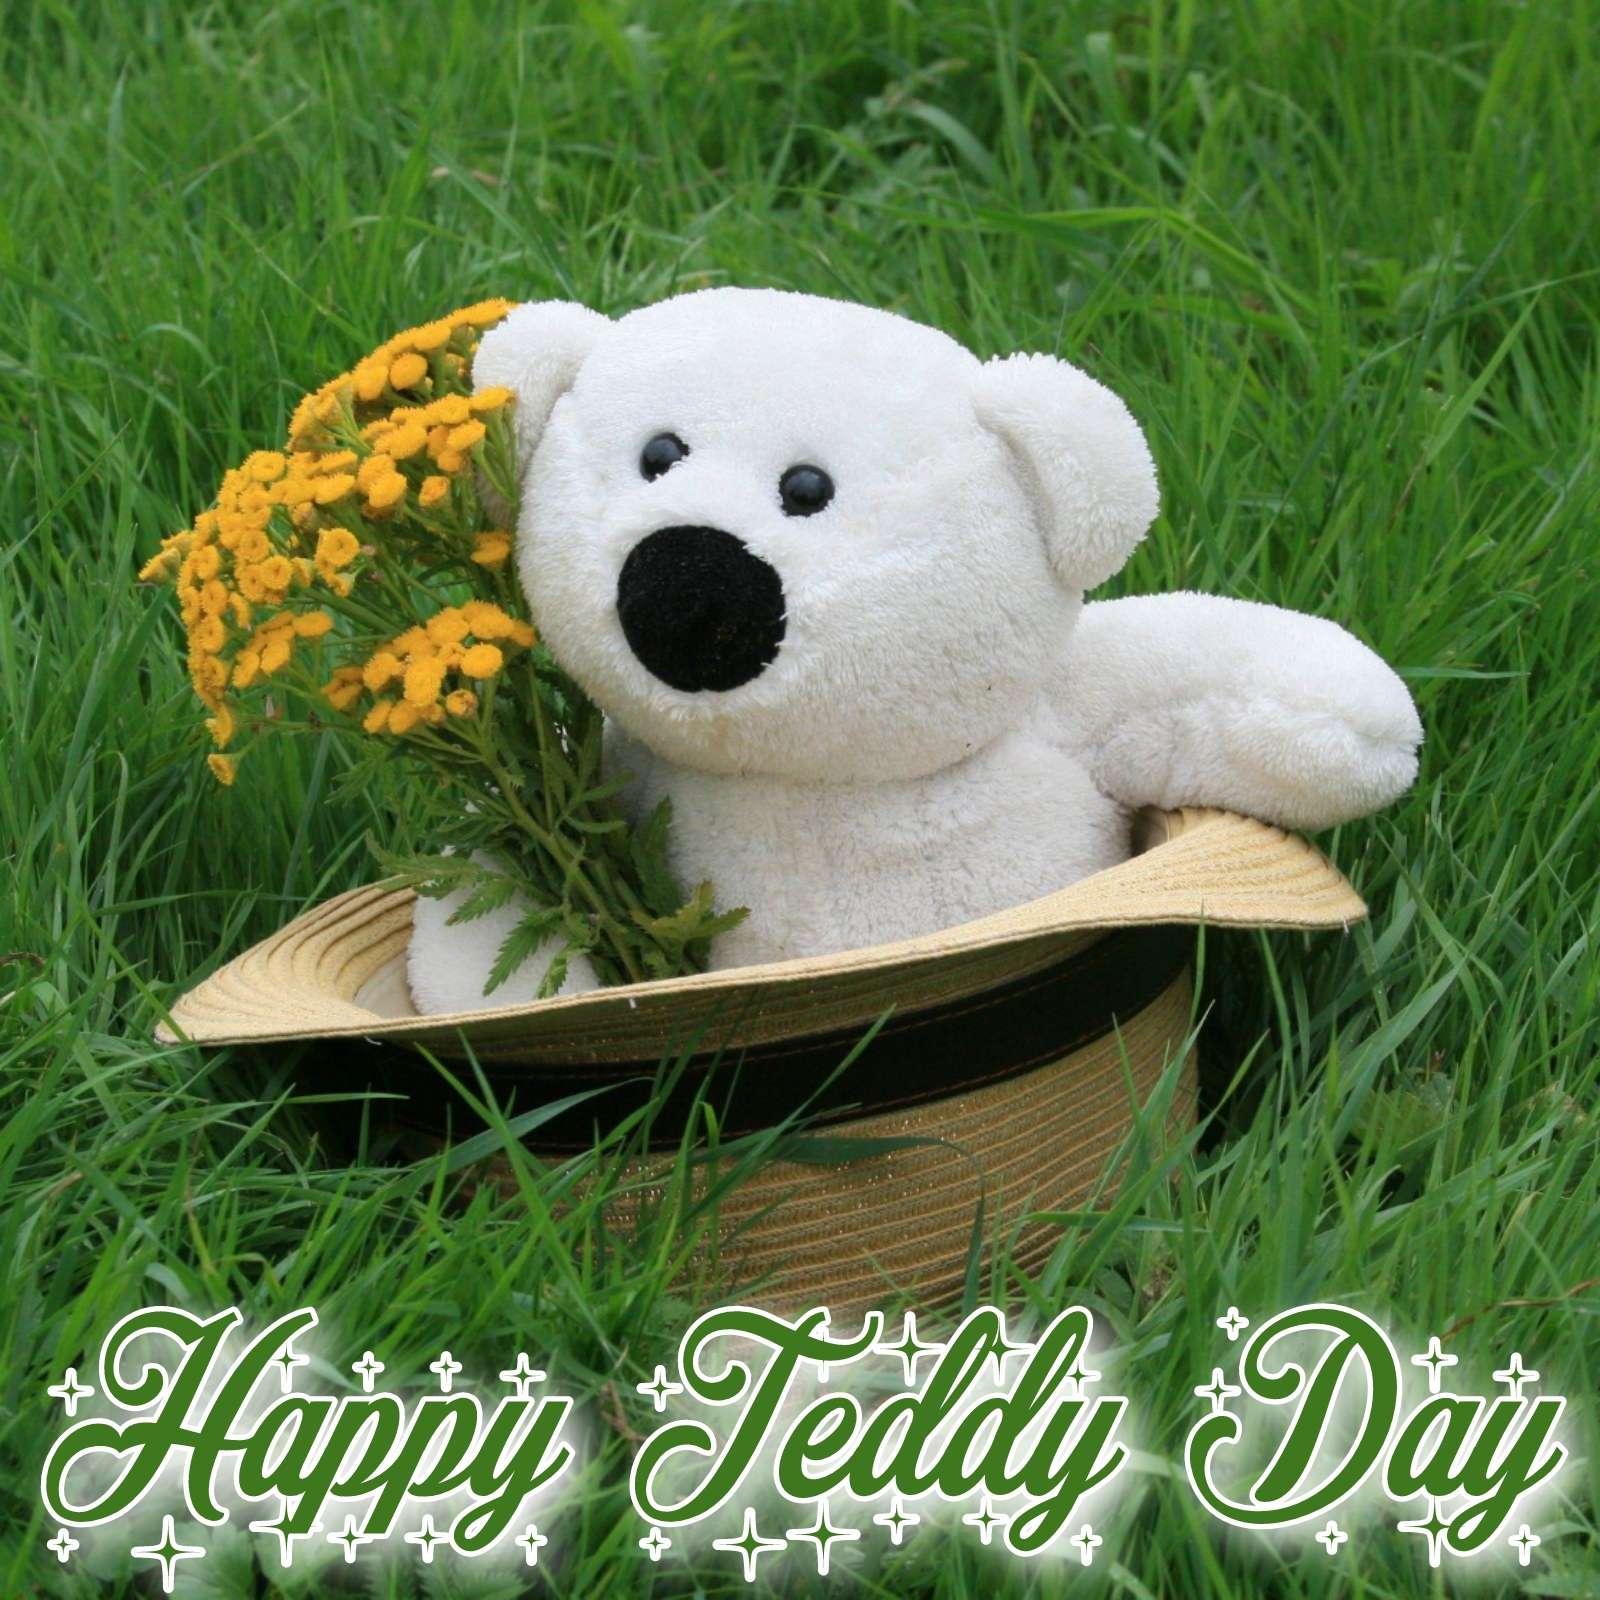 Happy Teddy Day Photo Download